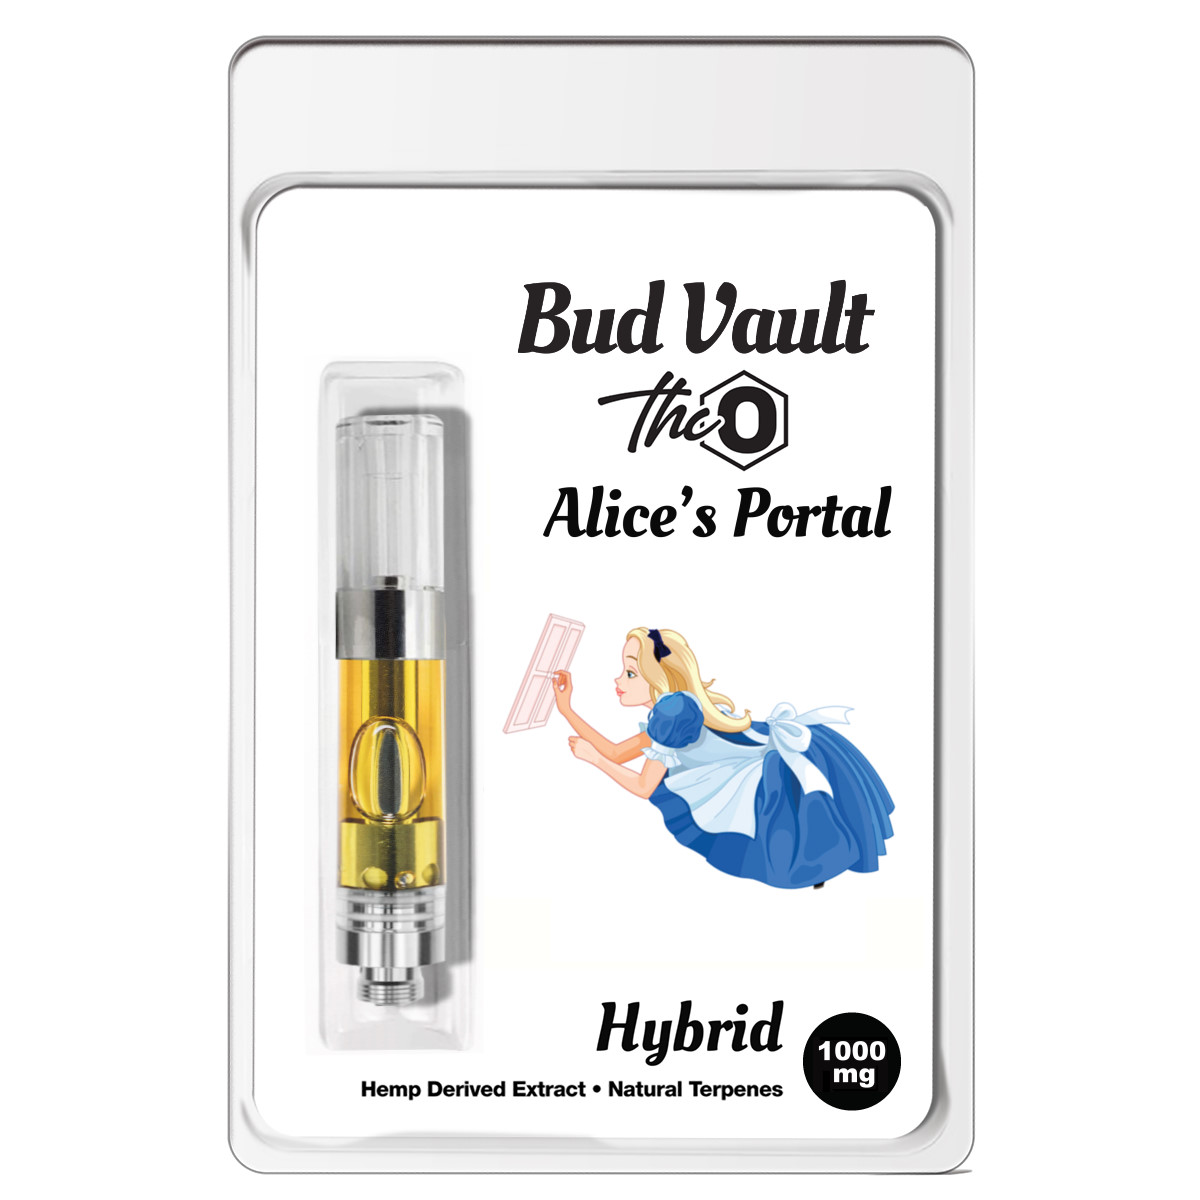 Alices Portal THCO Vape package